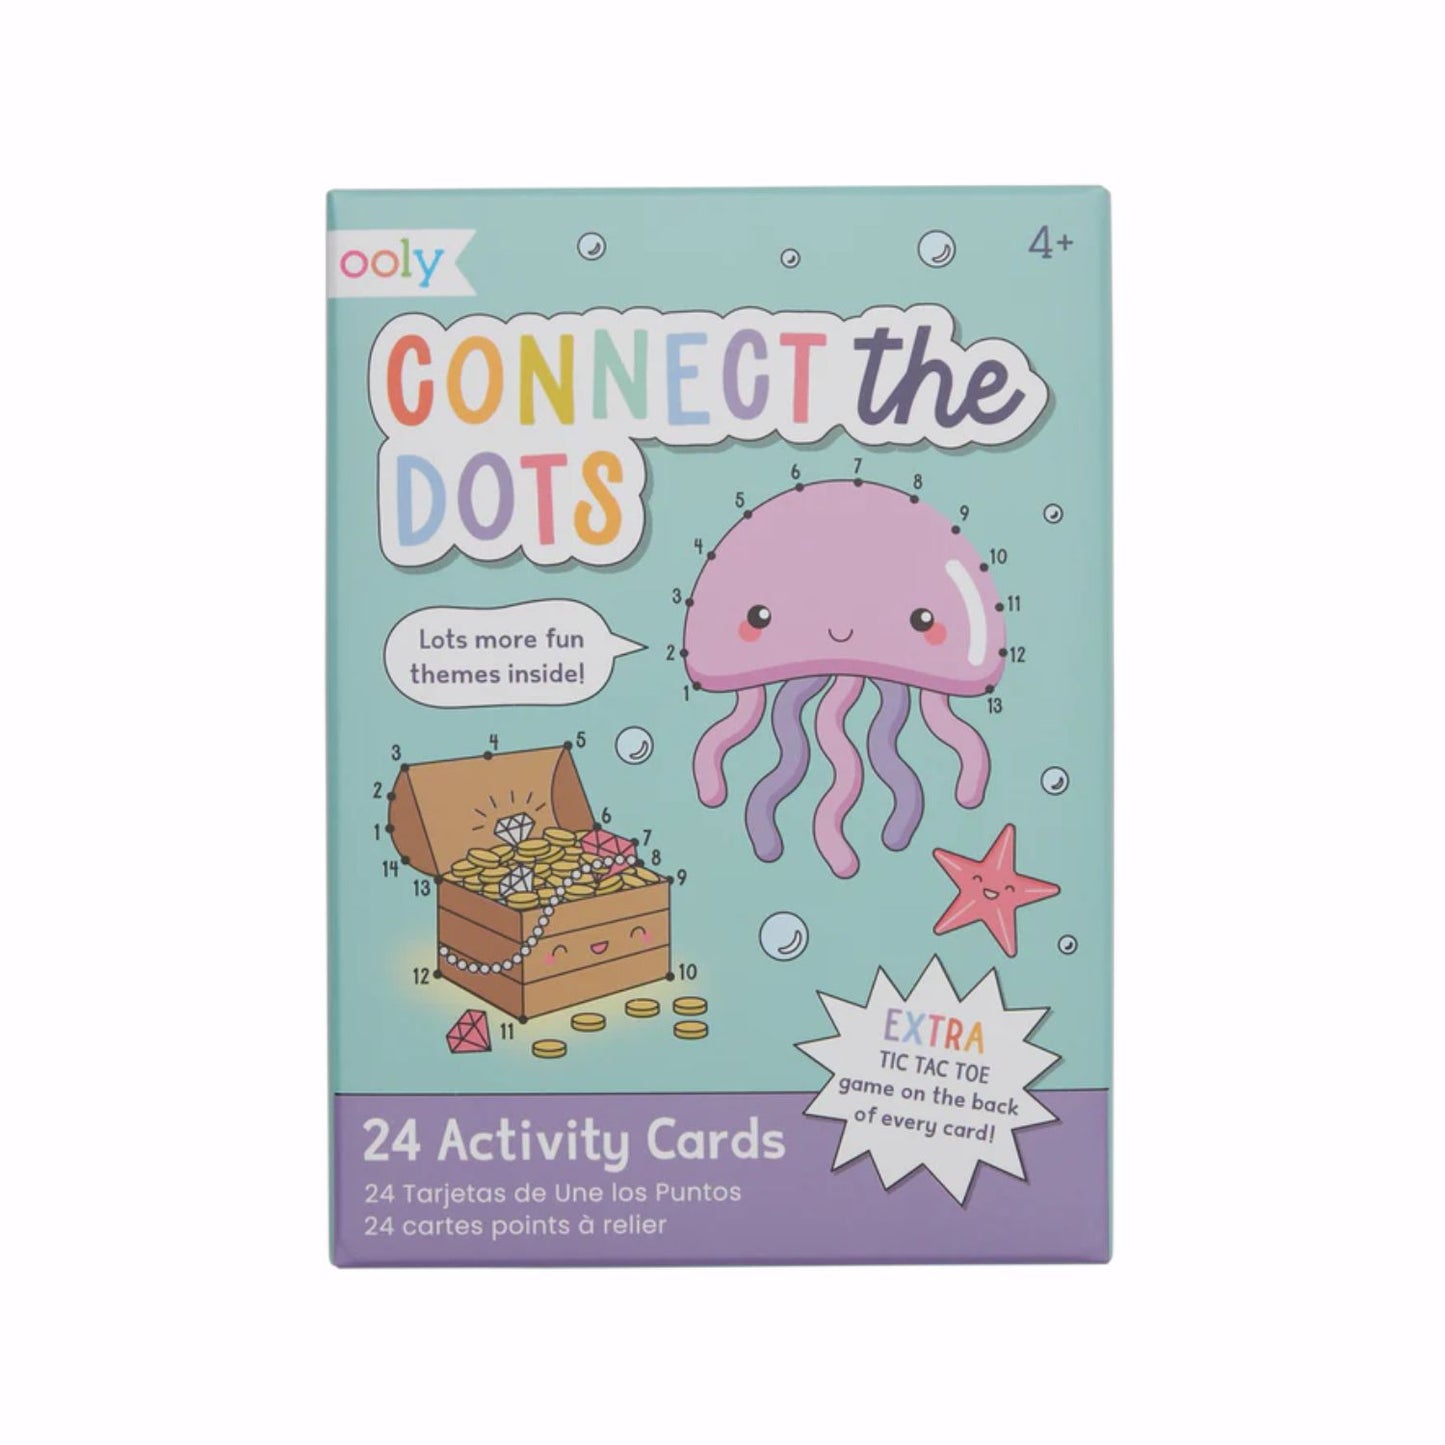 OOLY Paper Games - 24 Activity Cards - Connect the Dots